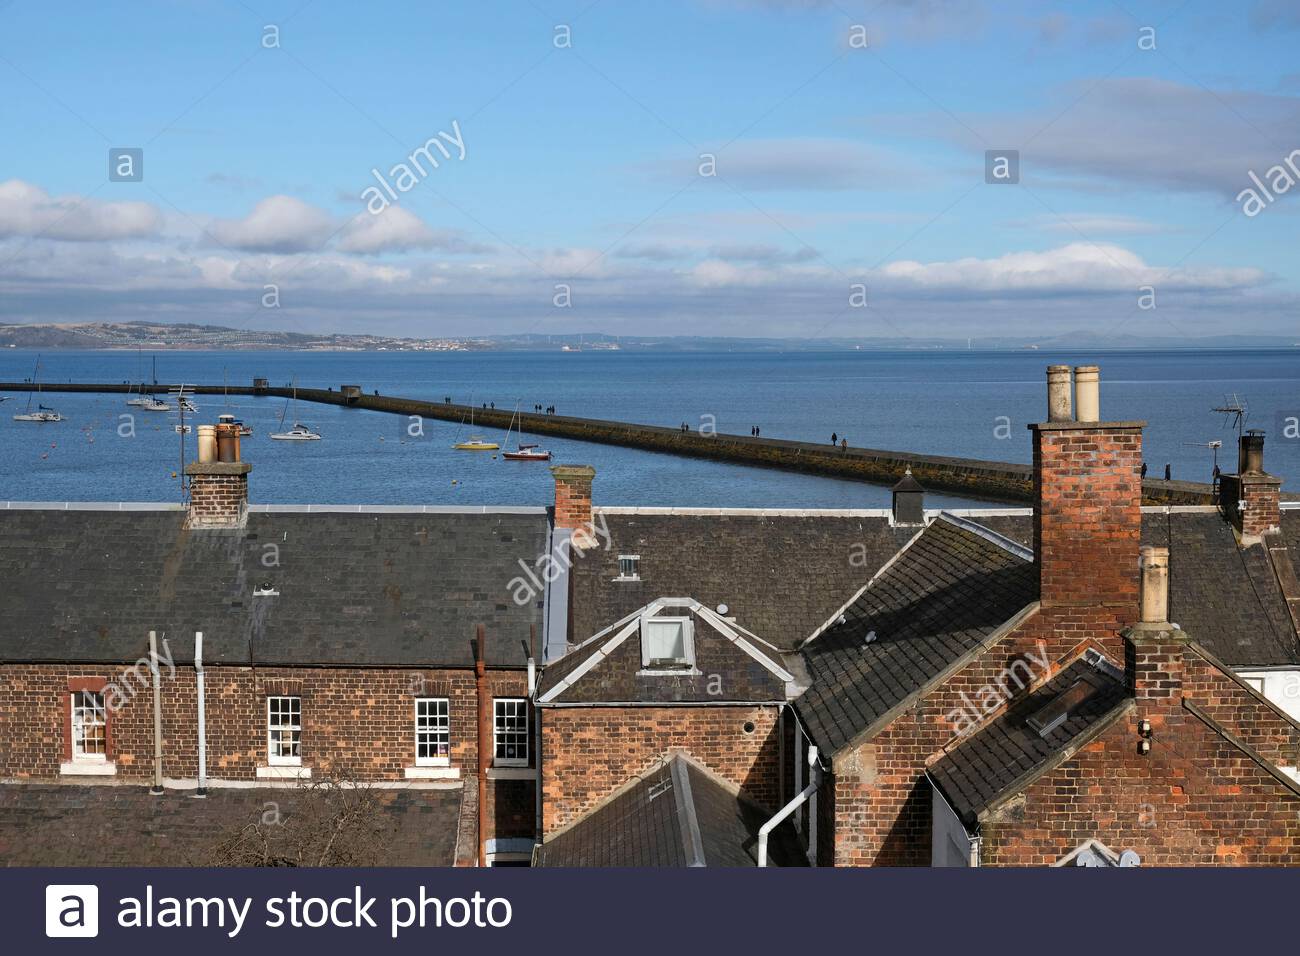 View over rooftops towards Granton harbour and breakwater in the Firth of Forth Estuary, Edinburgh, Scotland Stock Photo